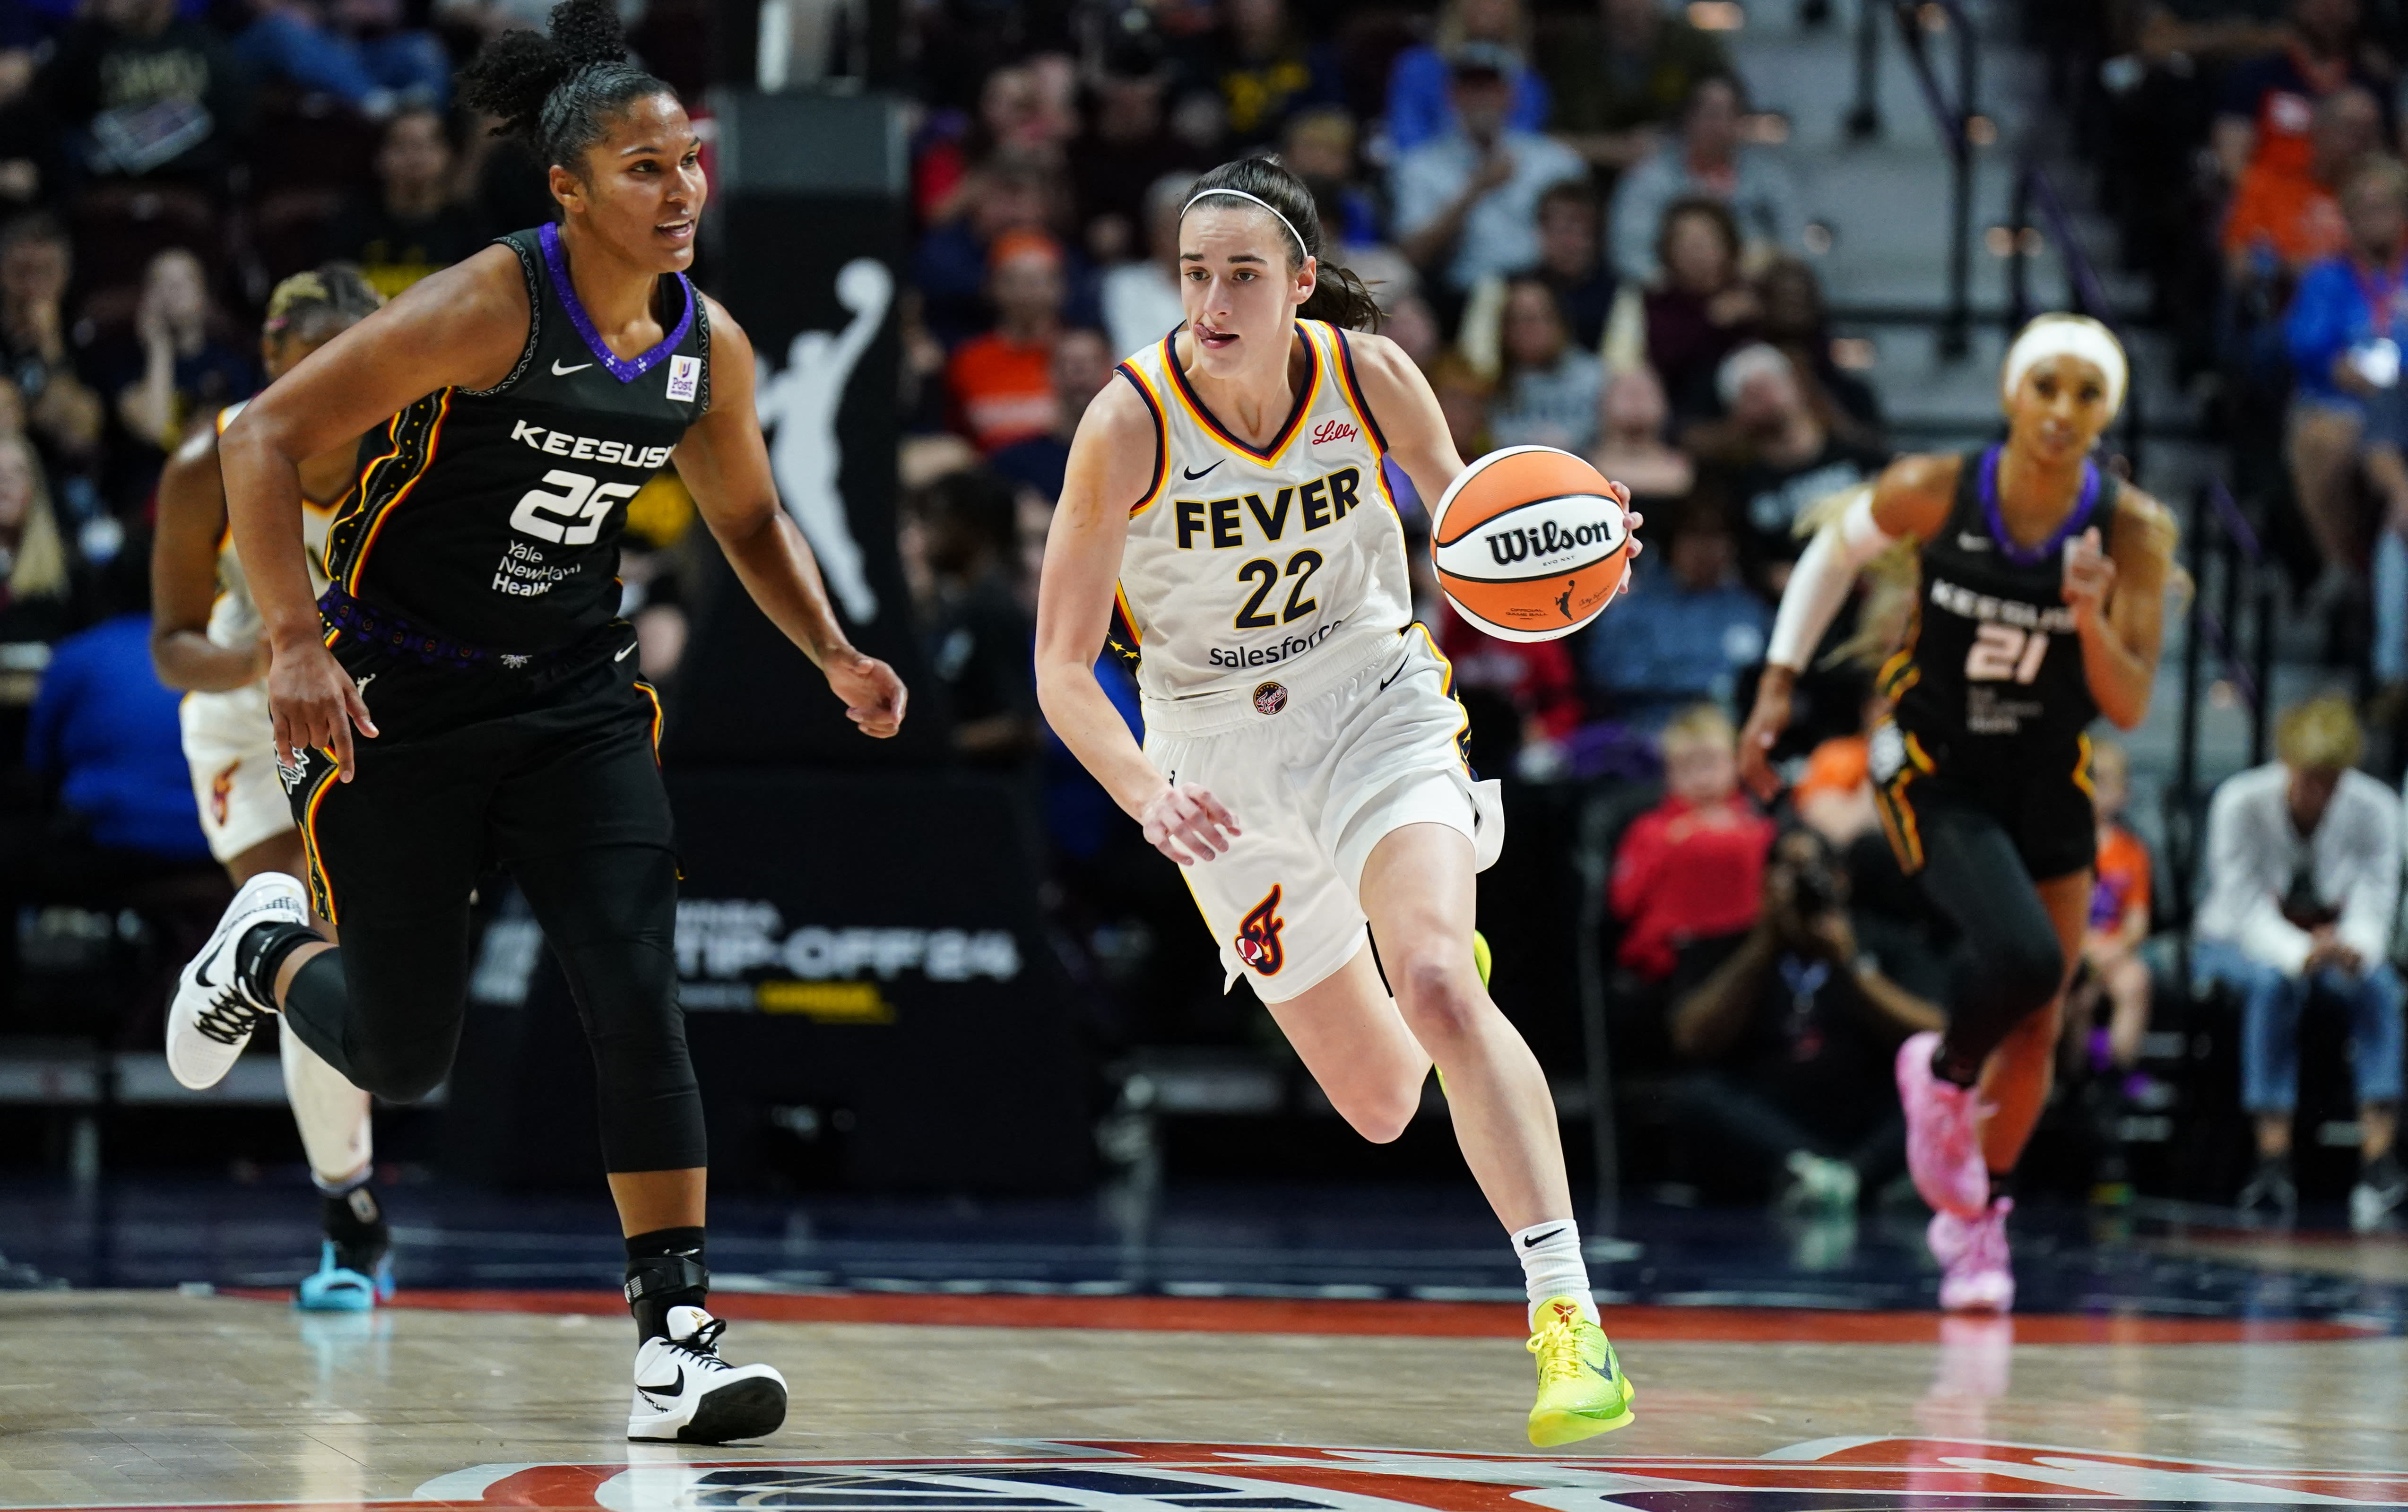 Caitlin Clark struggles early in WNBA debut as Indiana Fever fall to Connecticut Sun